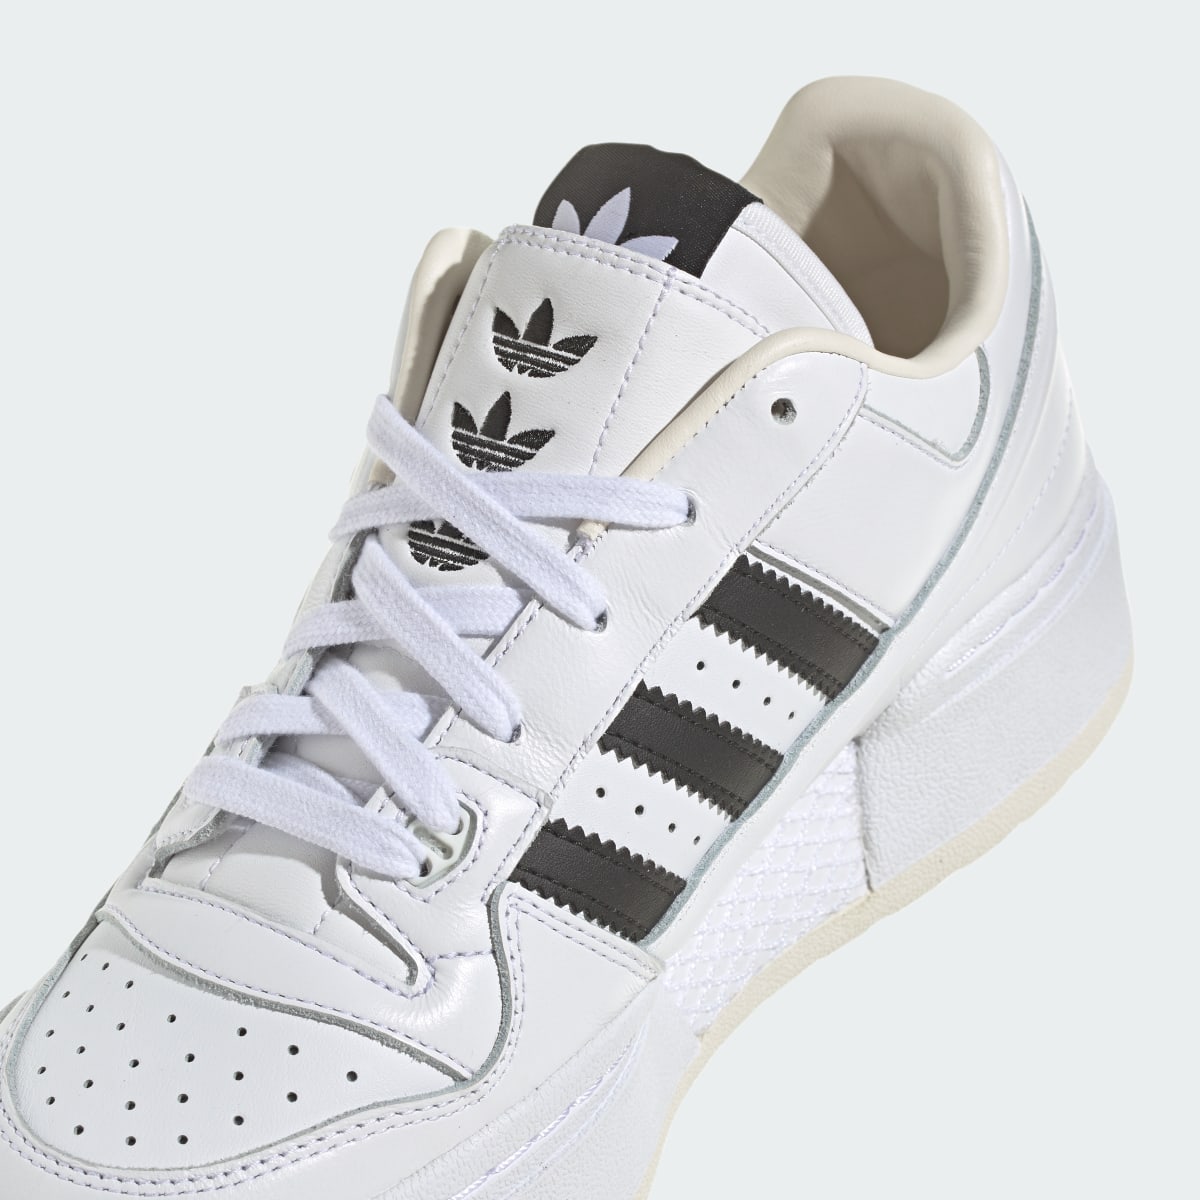 Adidas Chaussure Forum XLG. 9